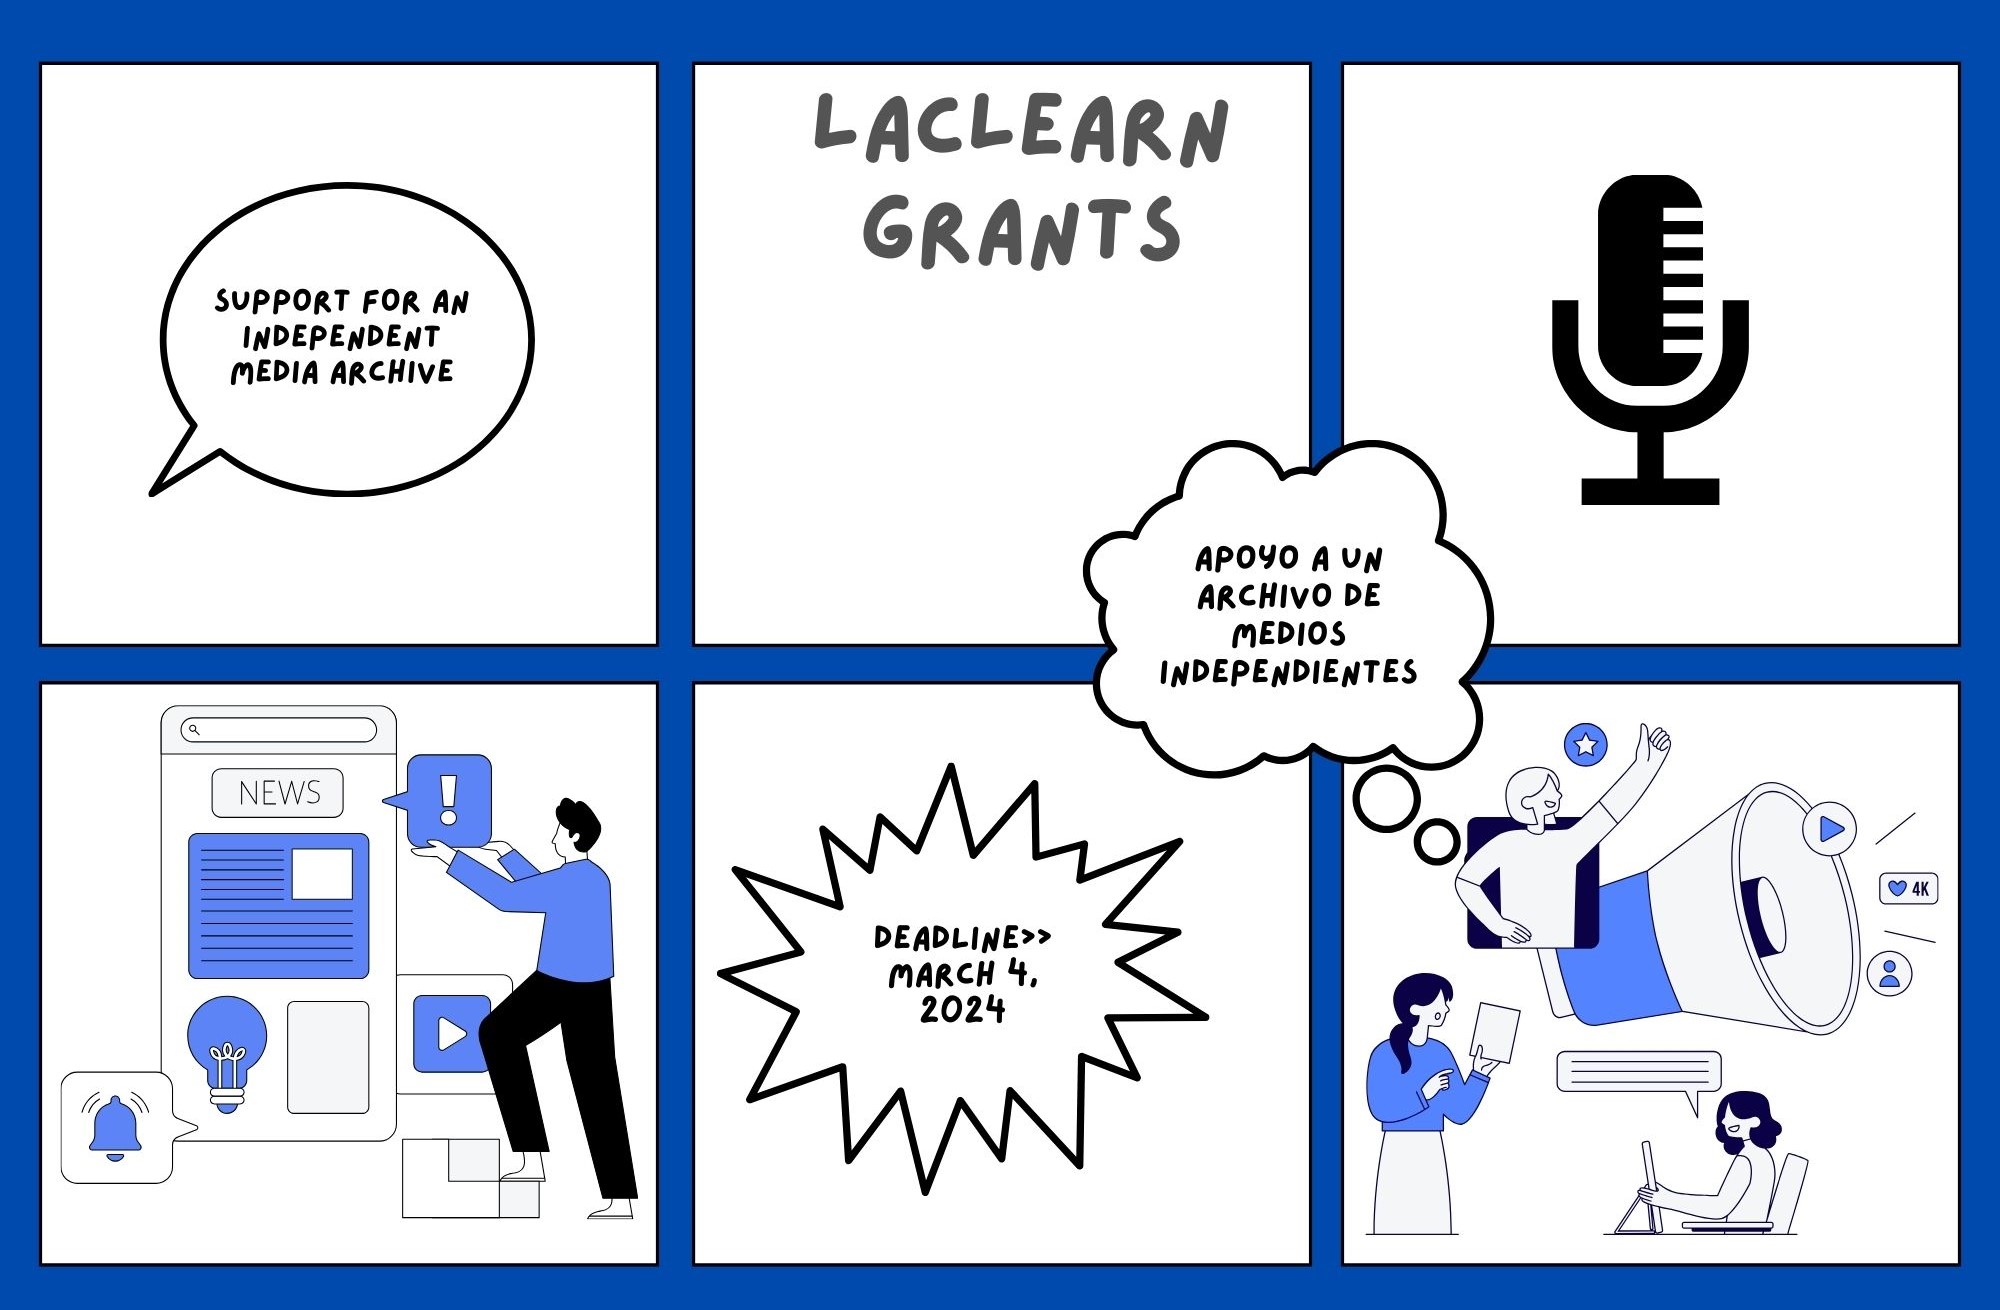 New LACLEARN Grants Call – Support for an Independent Media Archive - DEADLINE: March 4, 2024